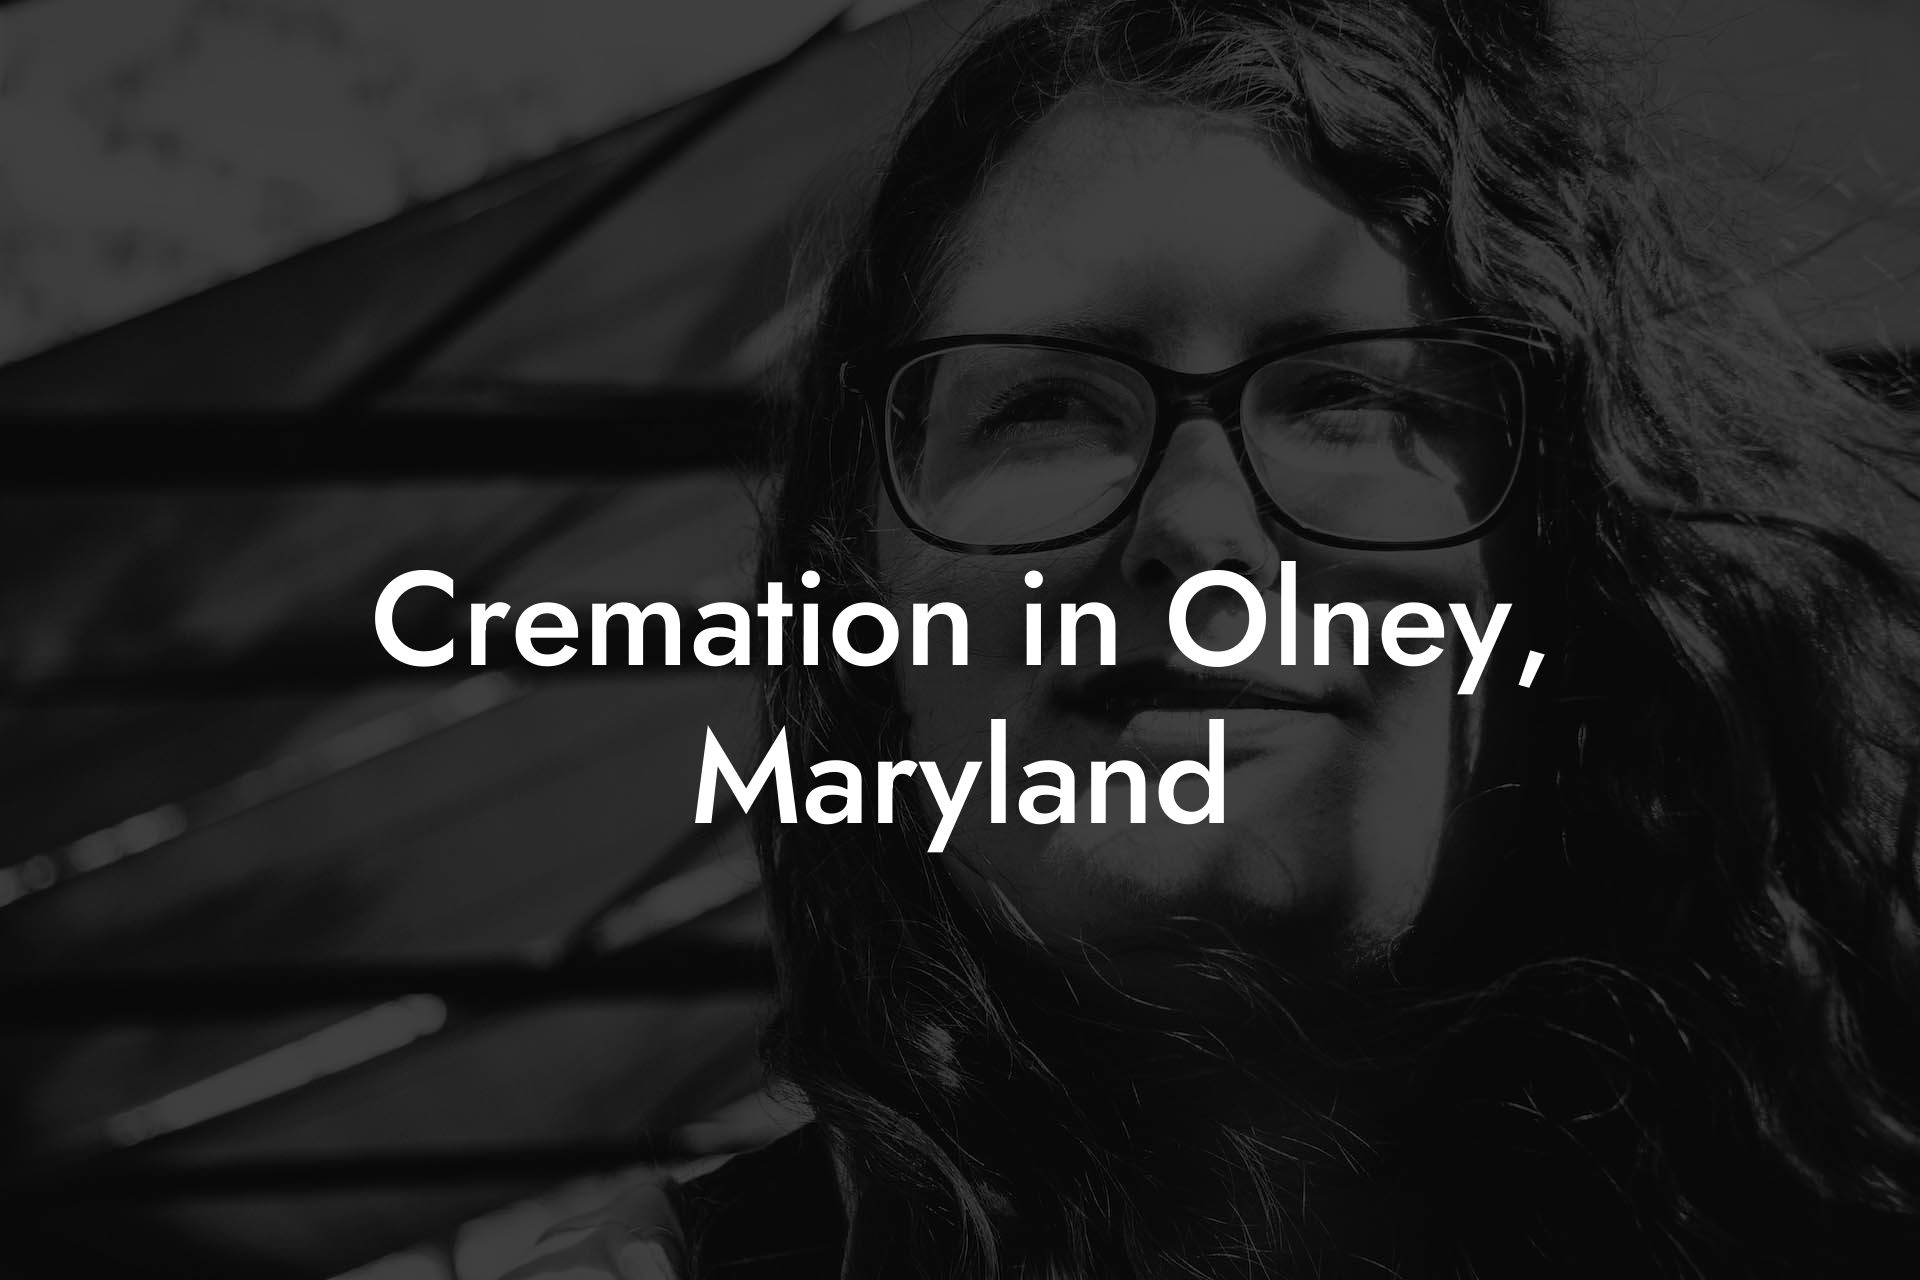 Cremation in Olney, Maryland